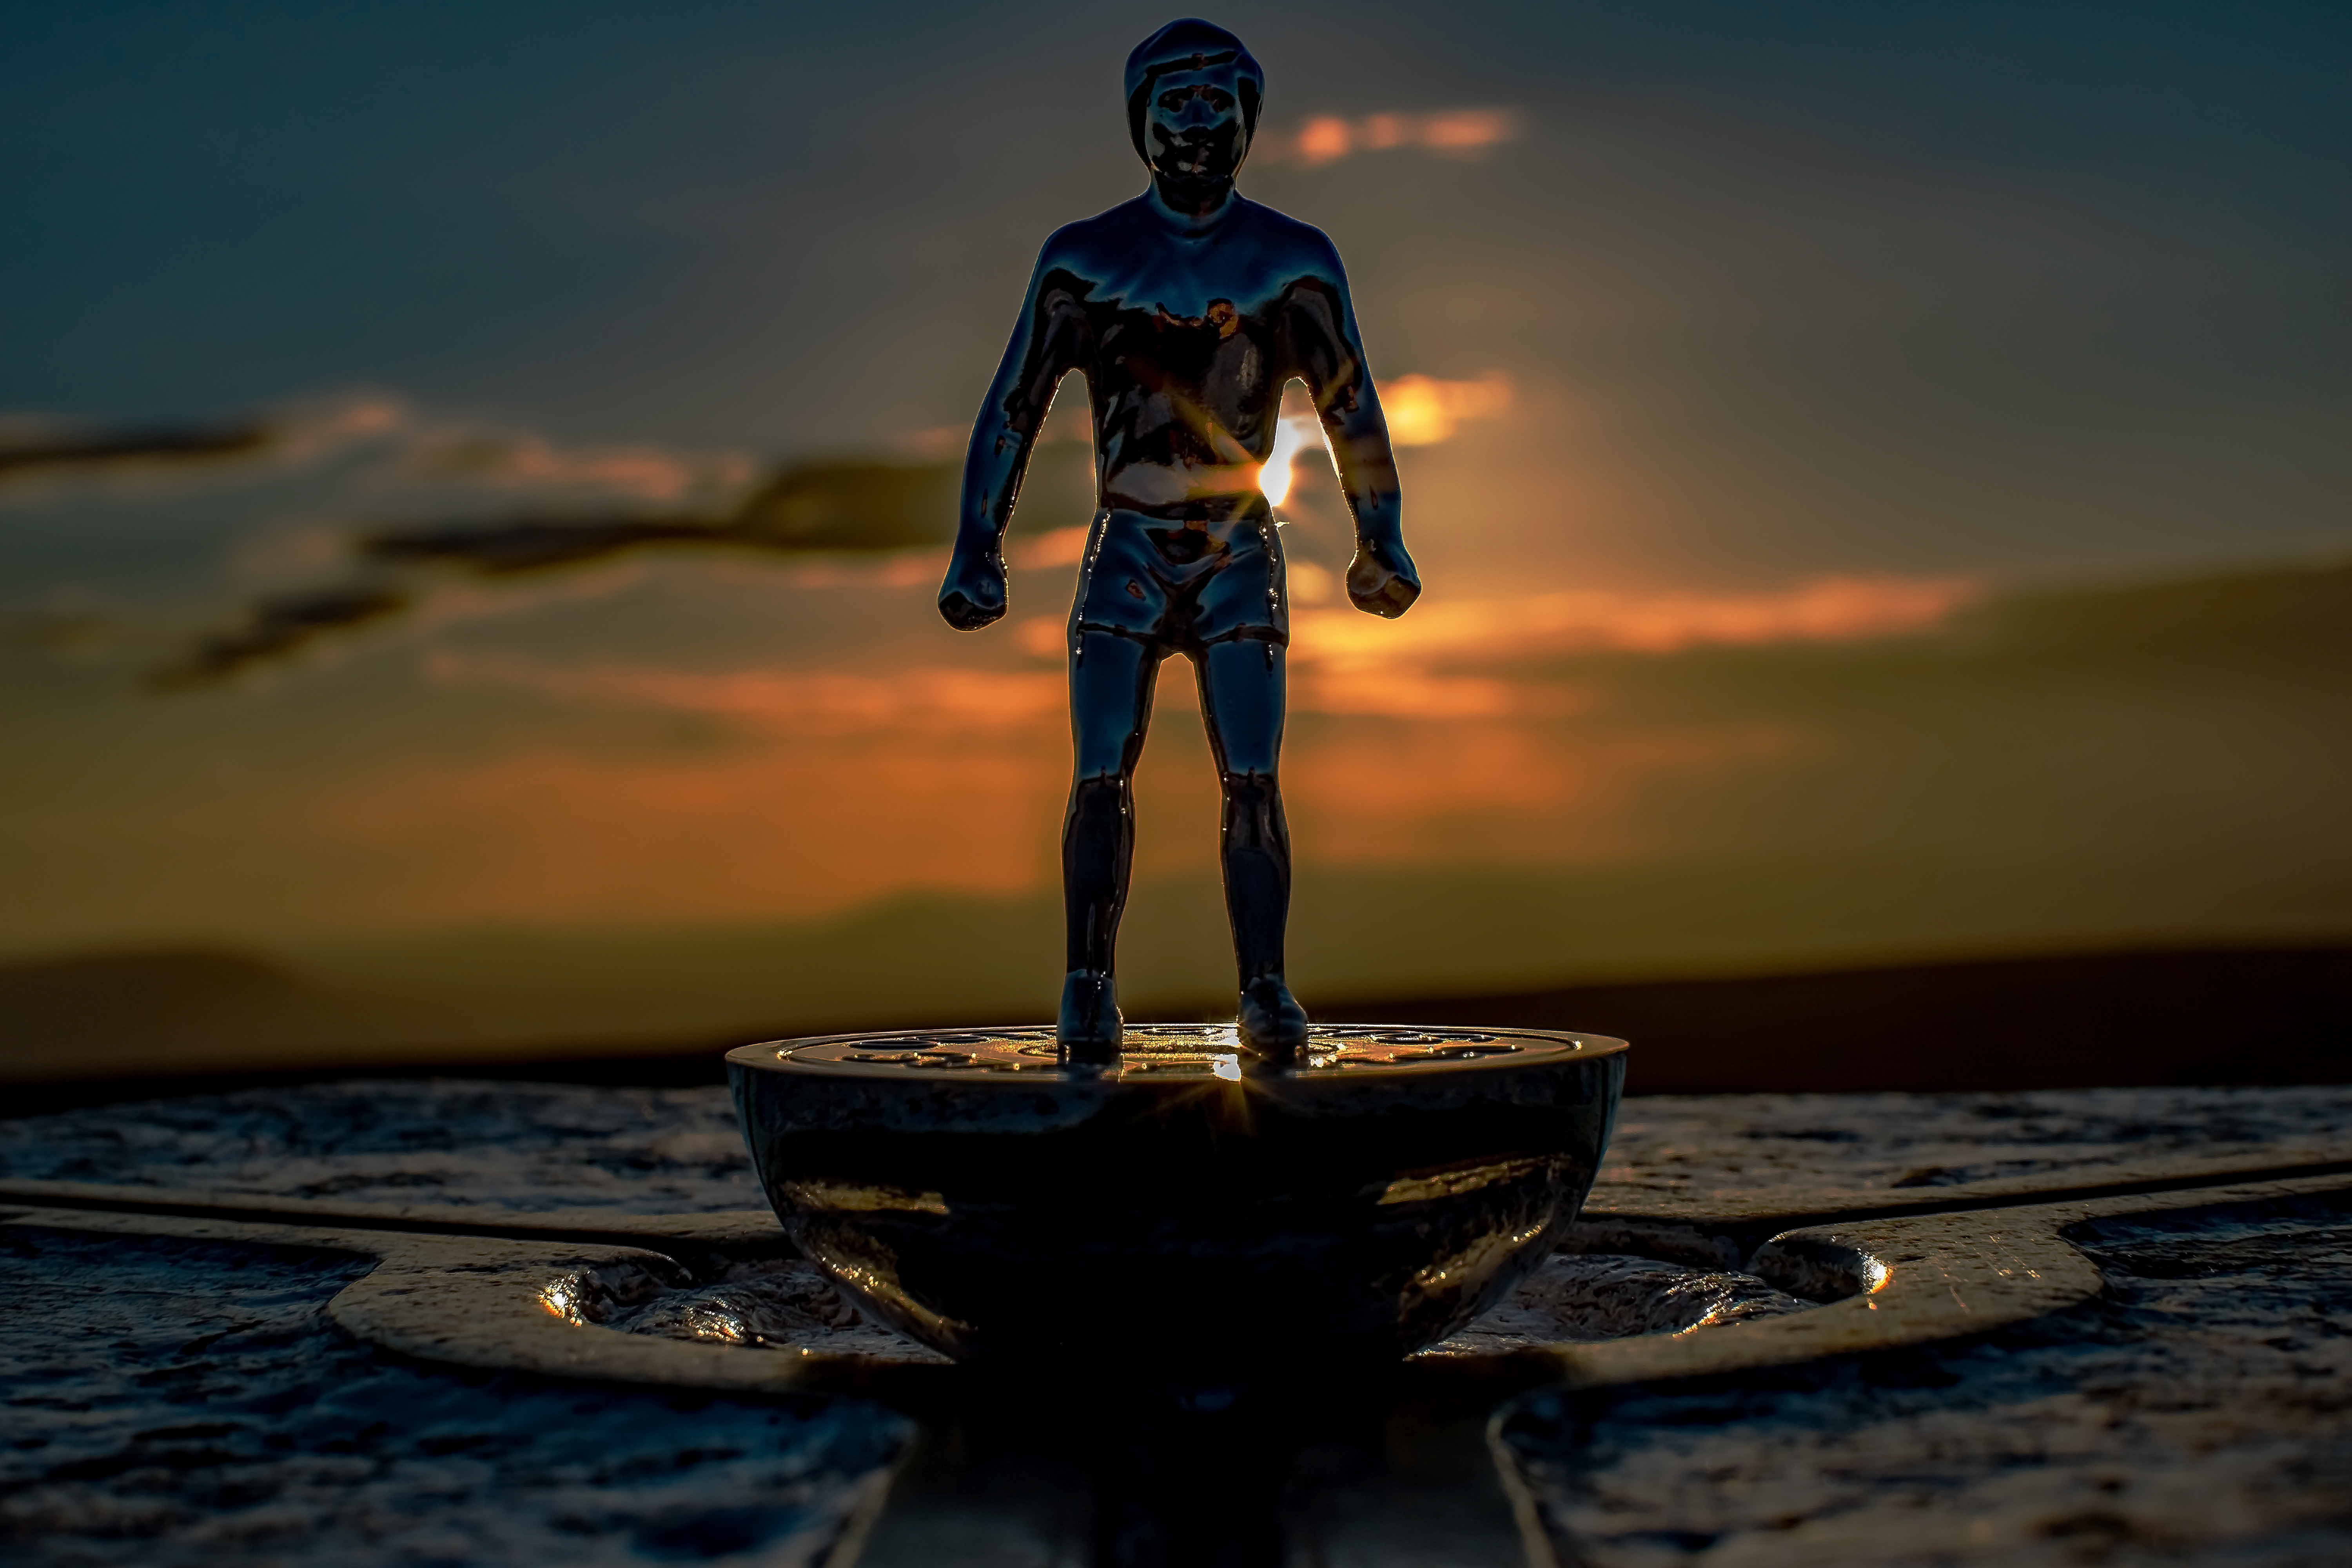 128405 Screensavers and Wallpapers Man for phone. Download miscellanea, miscellaneous, man, statuette, metal, metallic, sculpture pictures for free